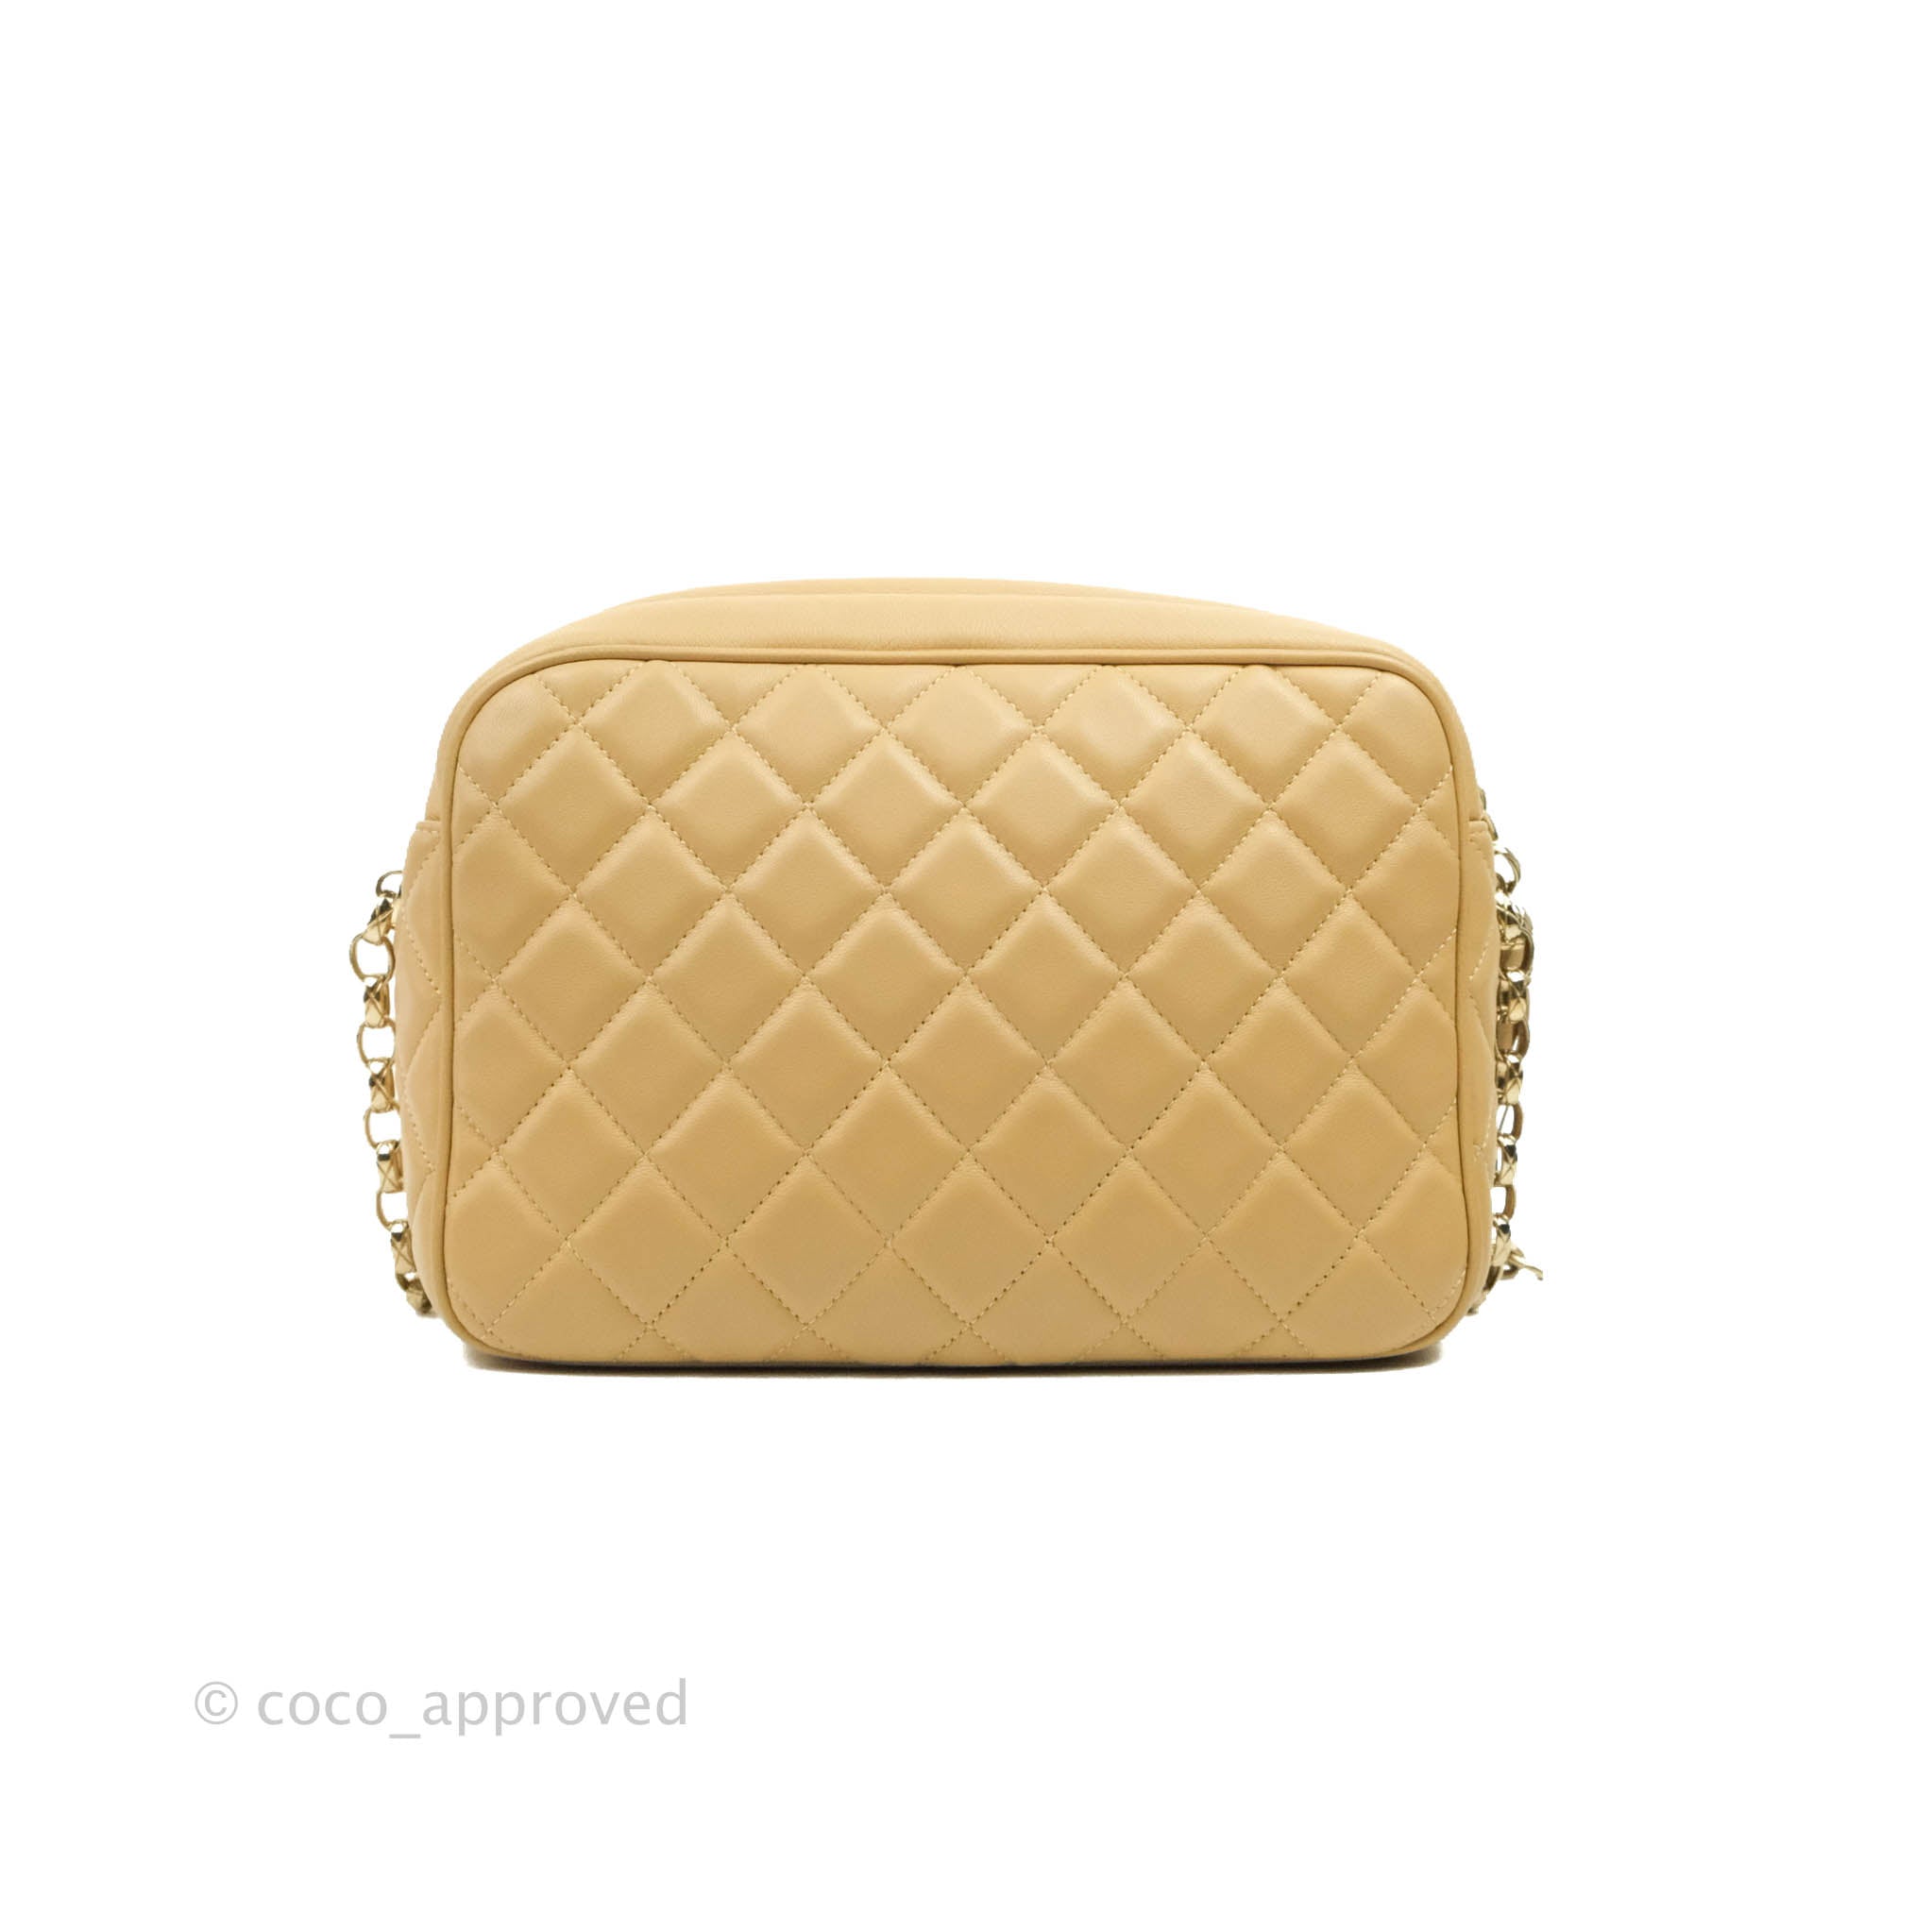 CHANEL Beige Quilted Caviar Leather Vintage Small Classic Camera